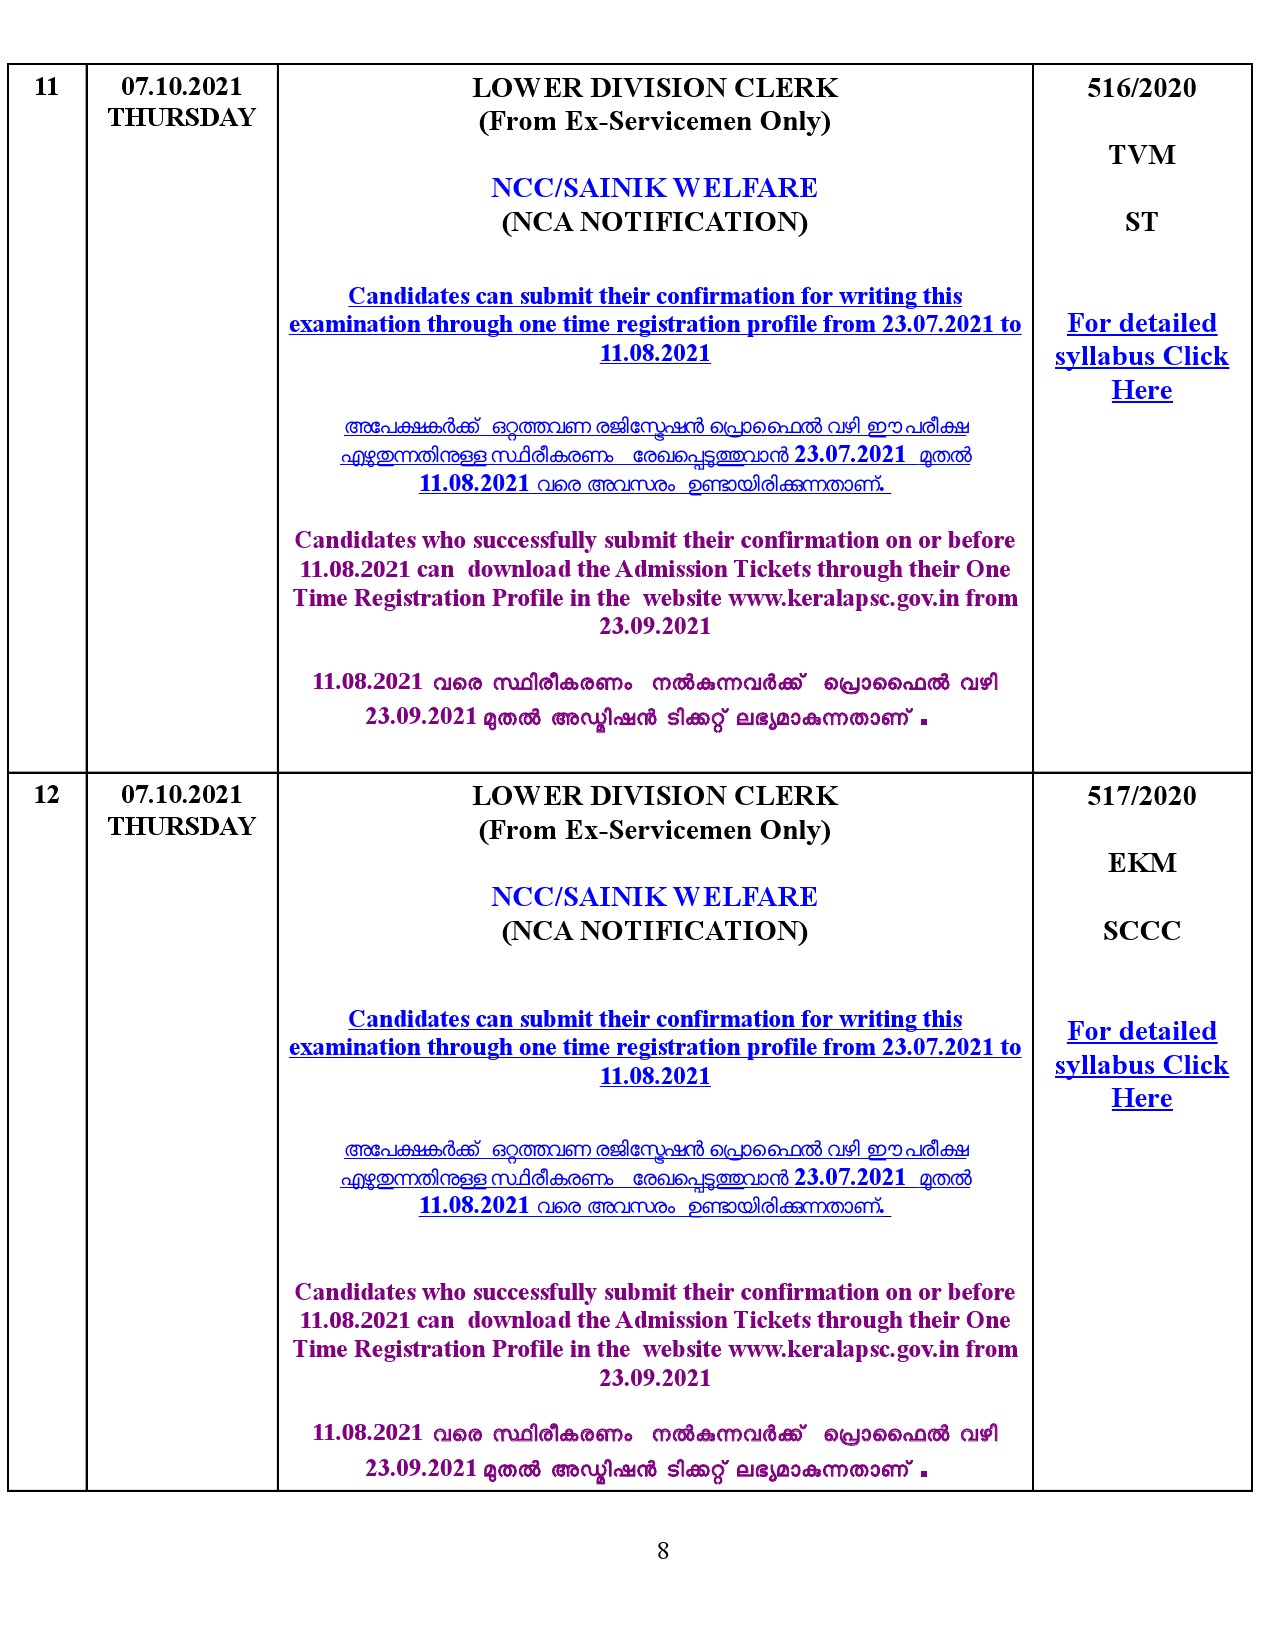 KPSC Examination Programme For The Month Of October 2021 - Notification Image 8